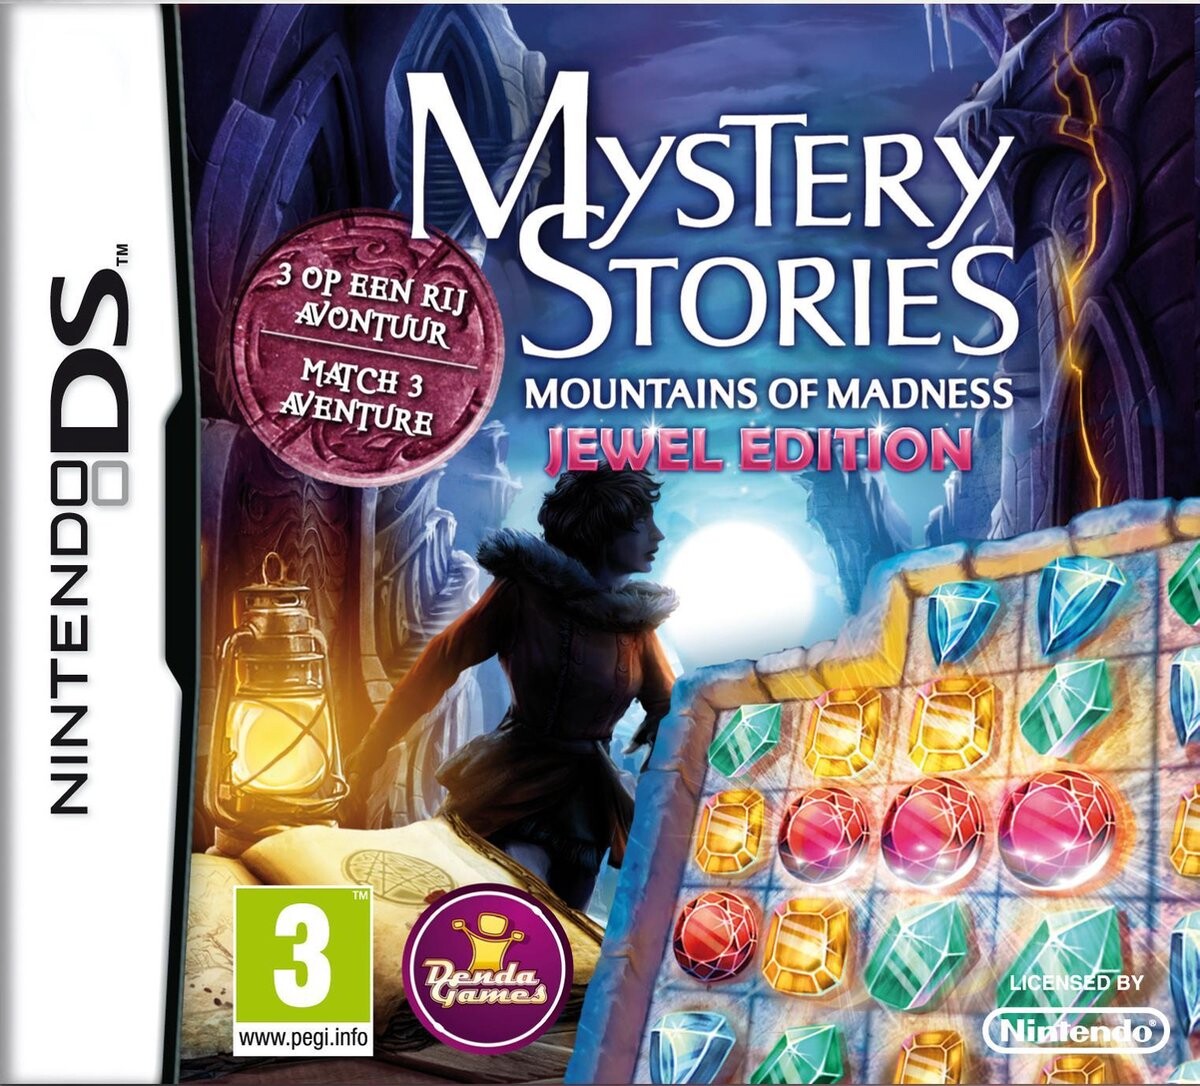 Mystery Stories Mountains of Madness (Jewel Edition) - Nintendo DS Games